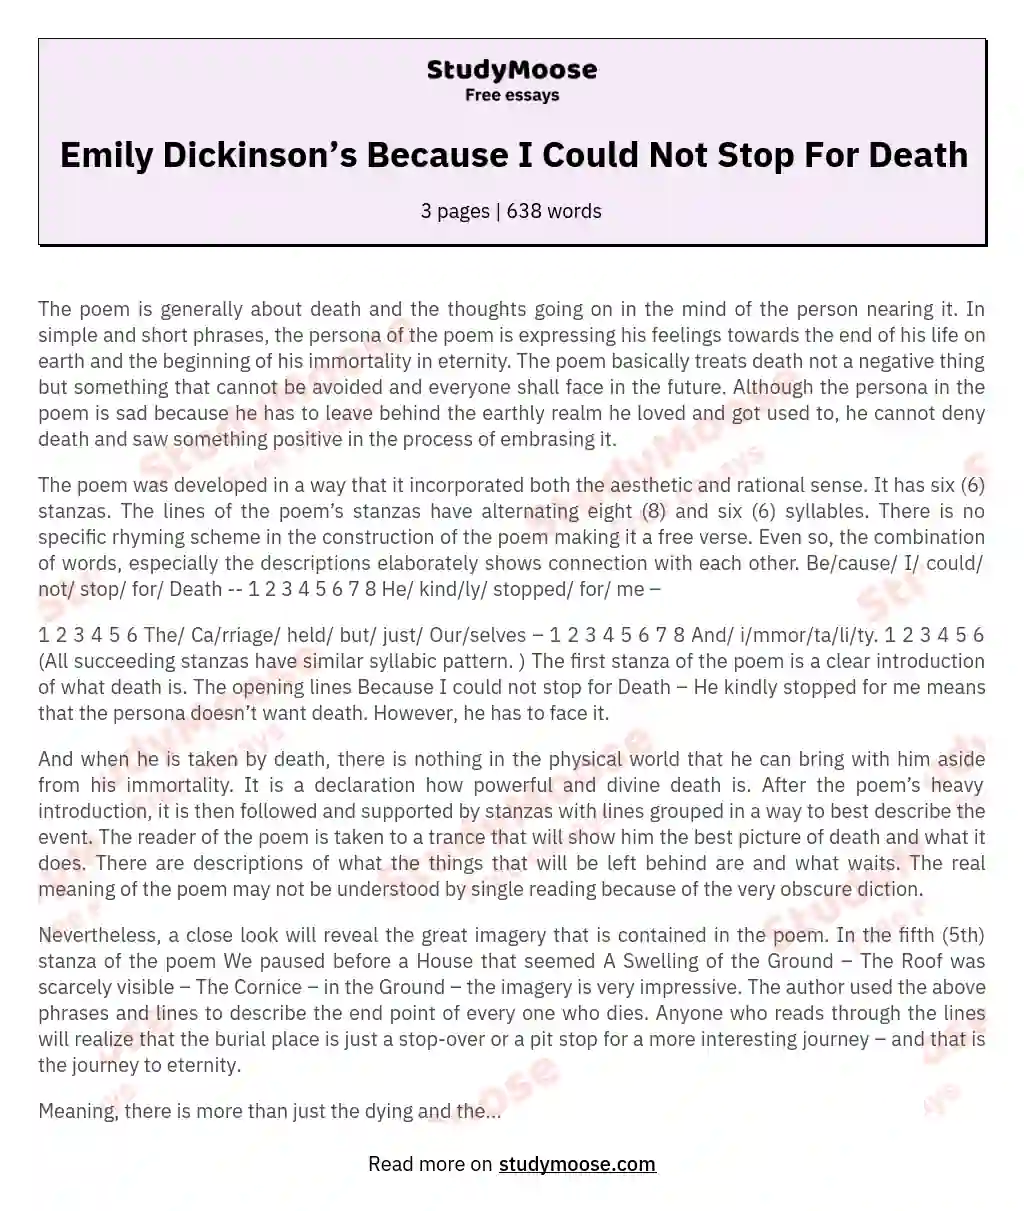 Emily Dickinson’s Because I Could Not Stop For Death